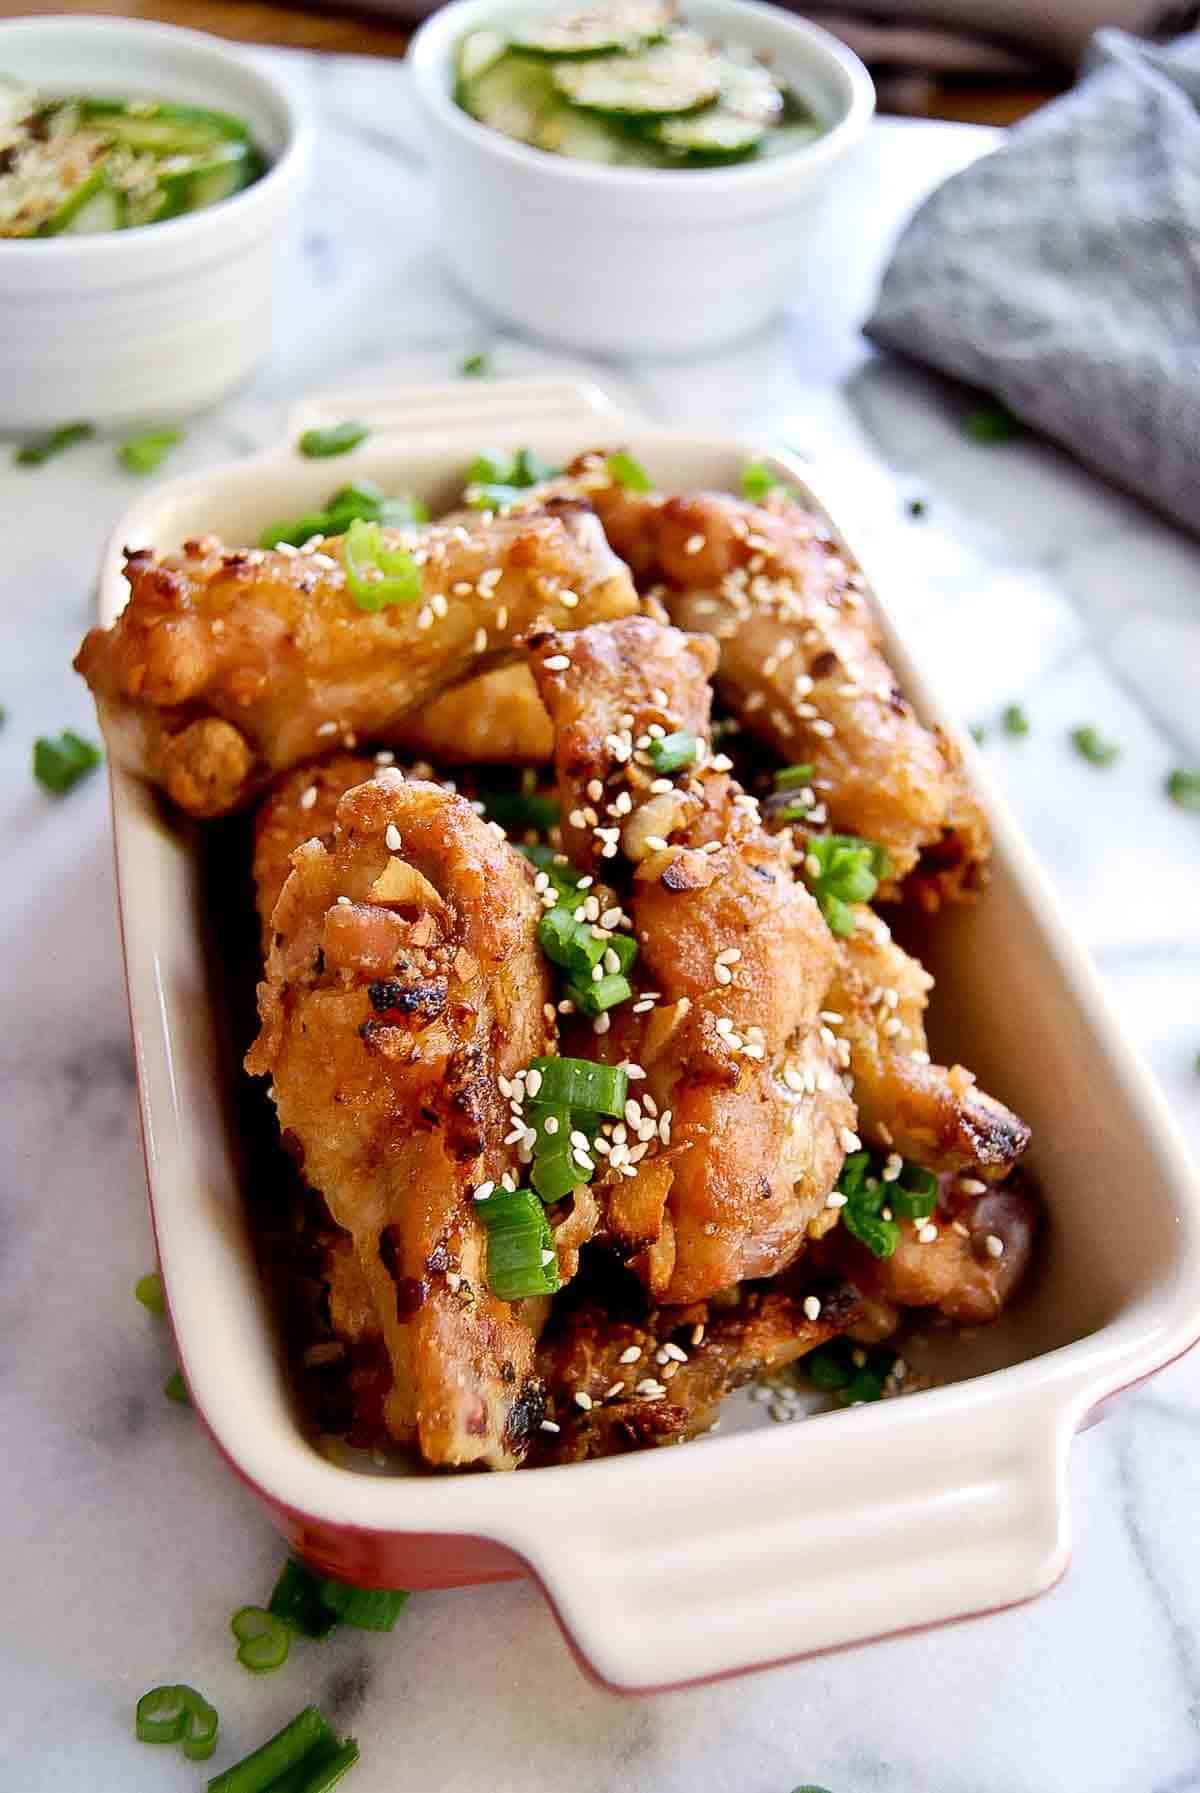 Flavorful Delights: Soy Garlic Chicken Recipe Revealed